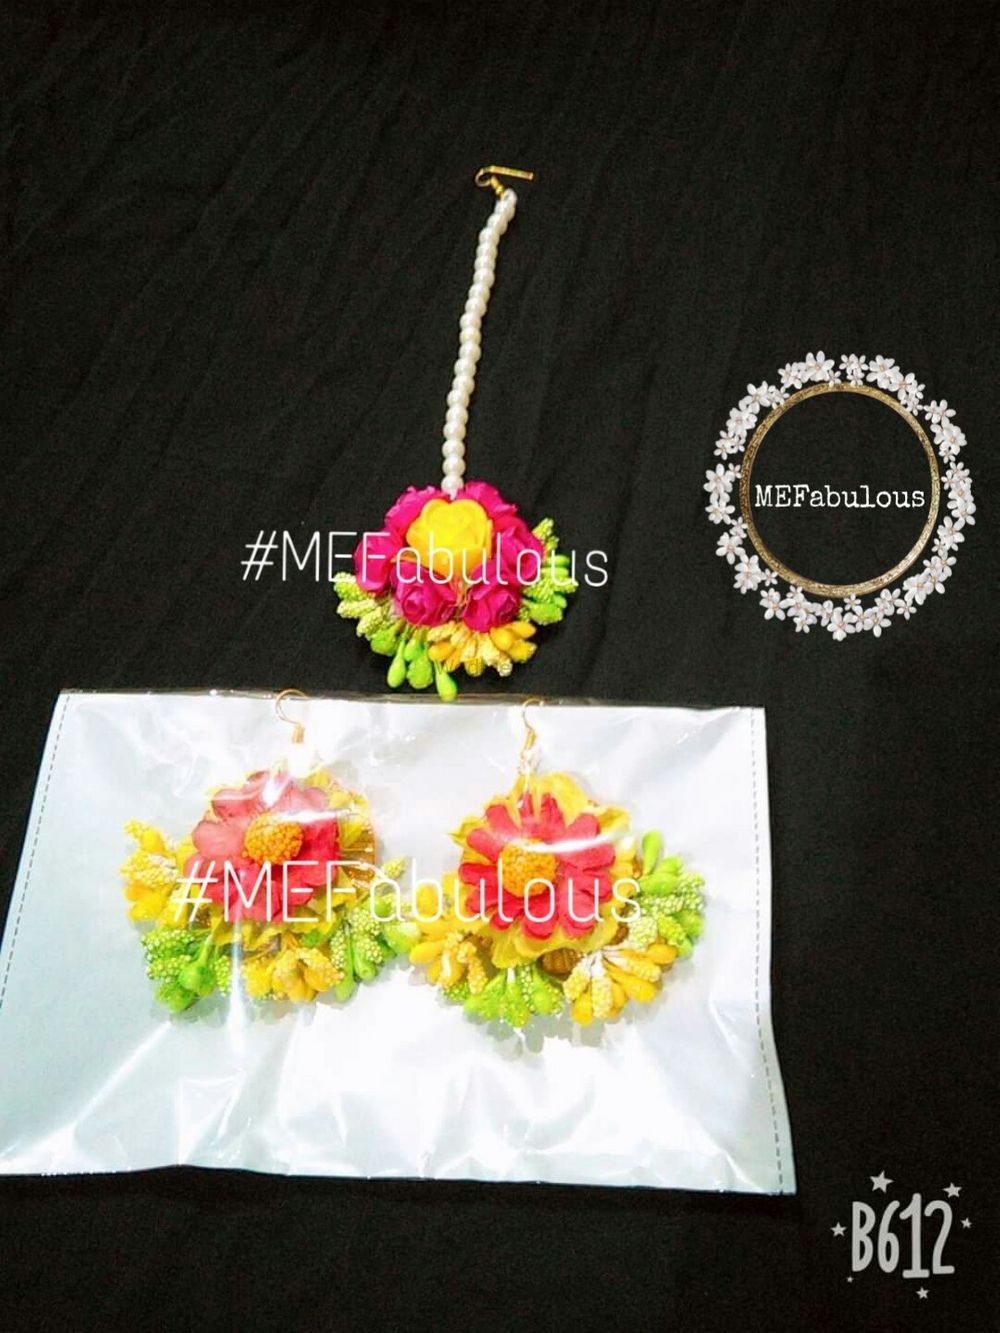 Photo From mehendi favours - By MEFabulous